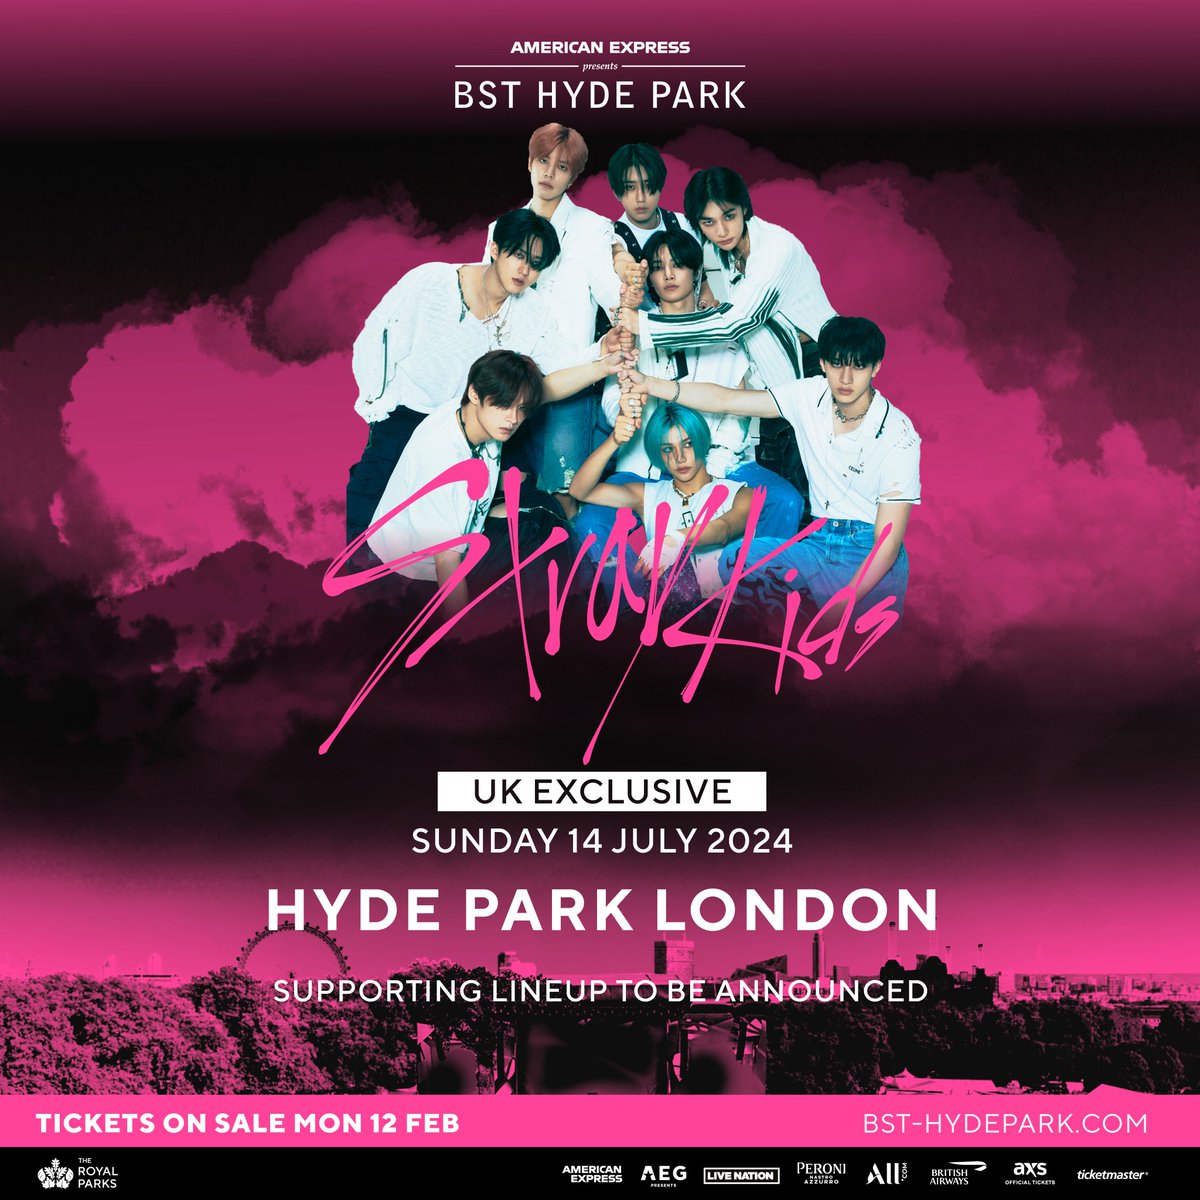 [BST Hyde Park]

스트레이 키즈가 BST Hyde Park 헤드라이너로 참여합니다🎶 7월 14일 런던에서 만나요! 
We are so excited to perform at American Express presents BST Hyde Park on July 14th!

👇아티스트 프리세일 등록하기
Register now to get access to artist presale tickets!